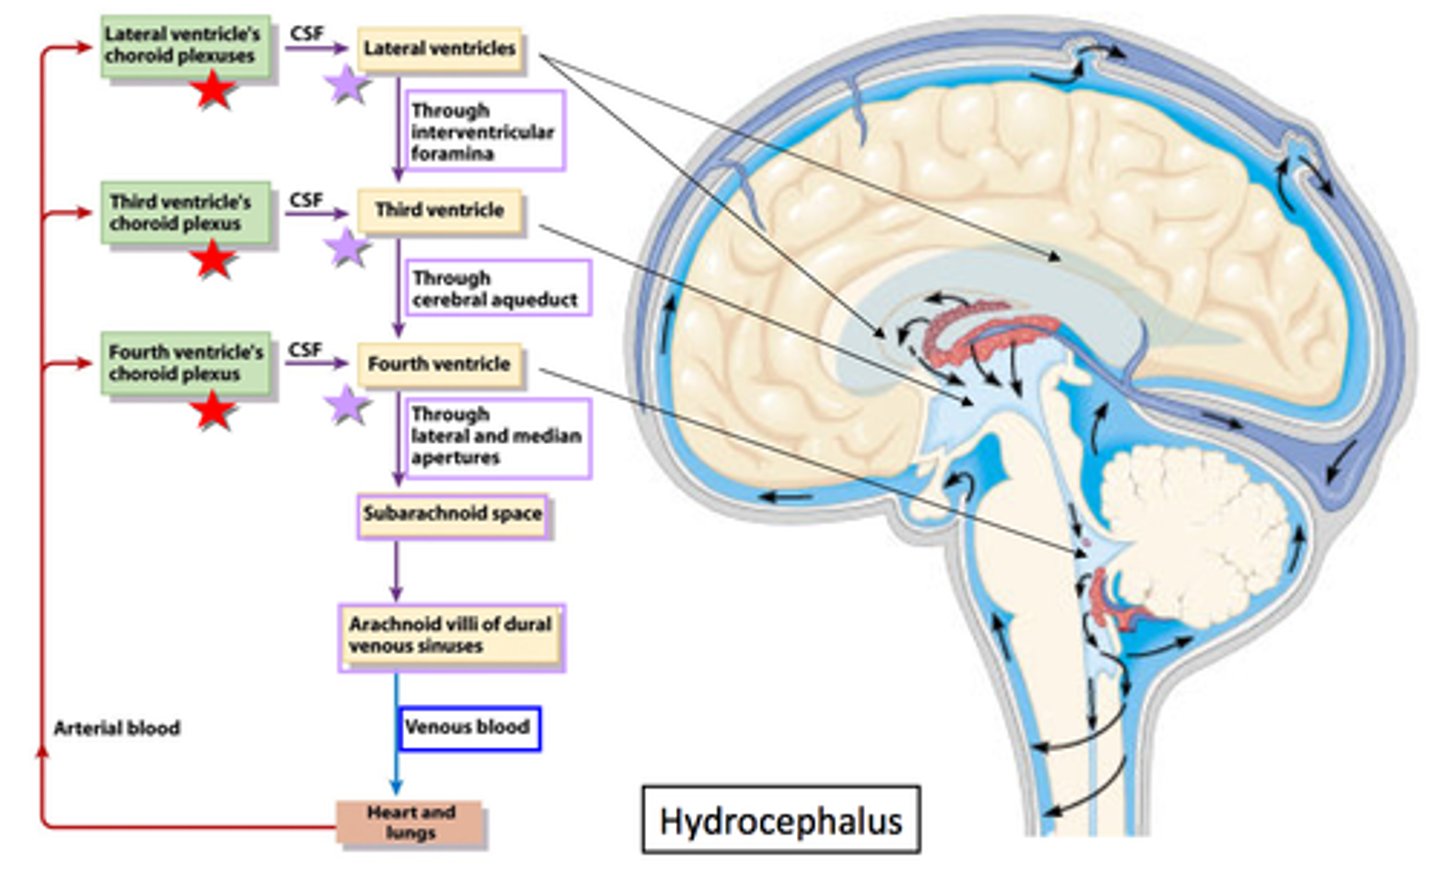 <p>Fluid in the space between the meninges that acts as a shock absorber that protects the central nervous system as well as maintains a proper chemical environment for neural signaling.</p><p>CSF is produced in the lateral ventricles and is resorbed into the venous superior sagittal sinus.</p>